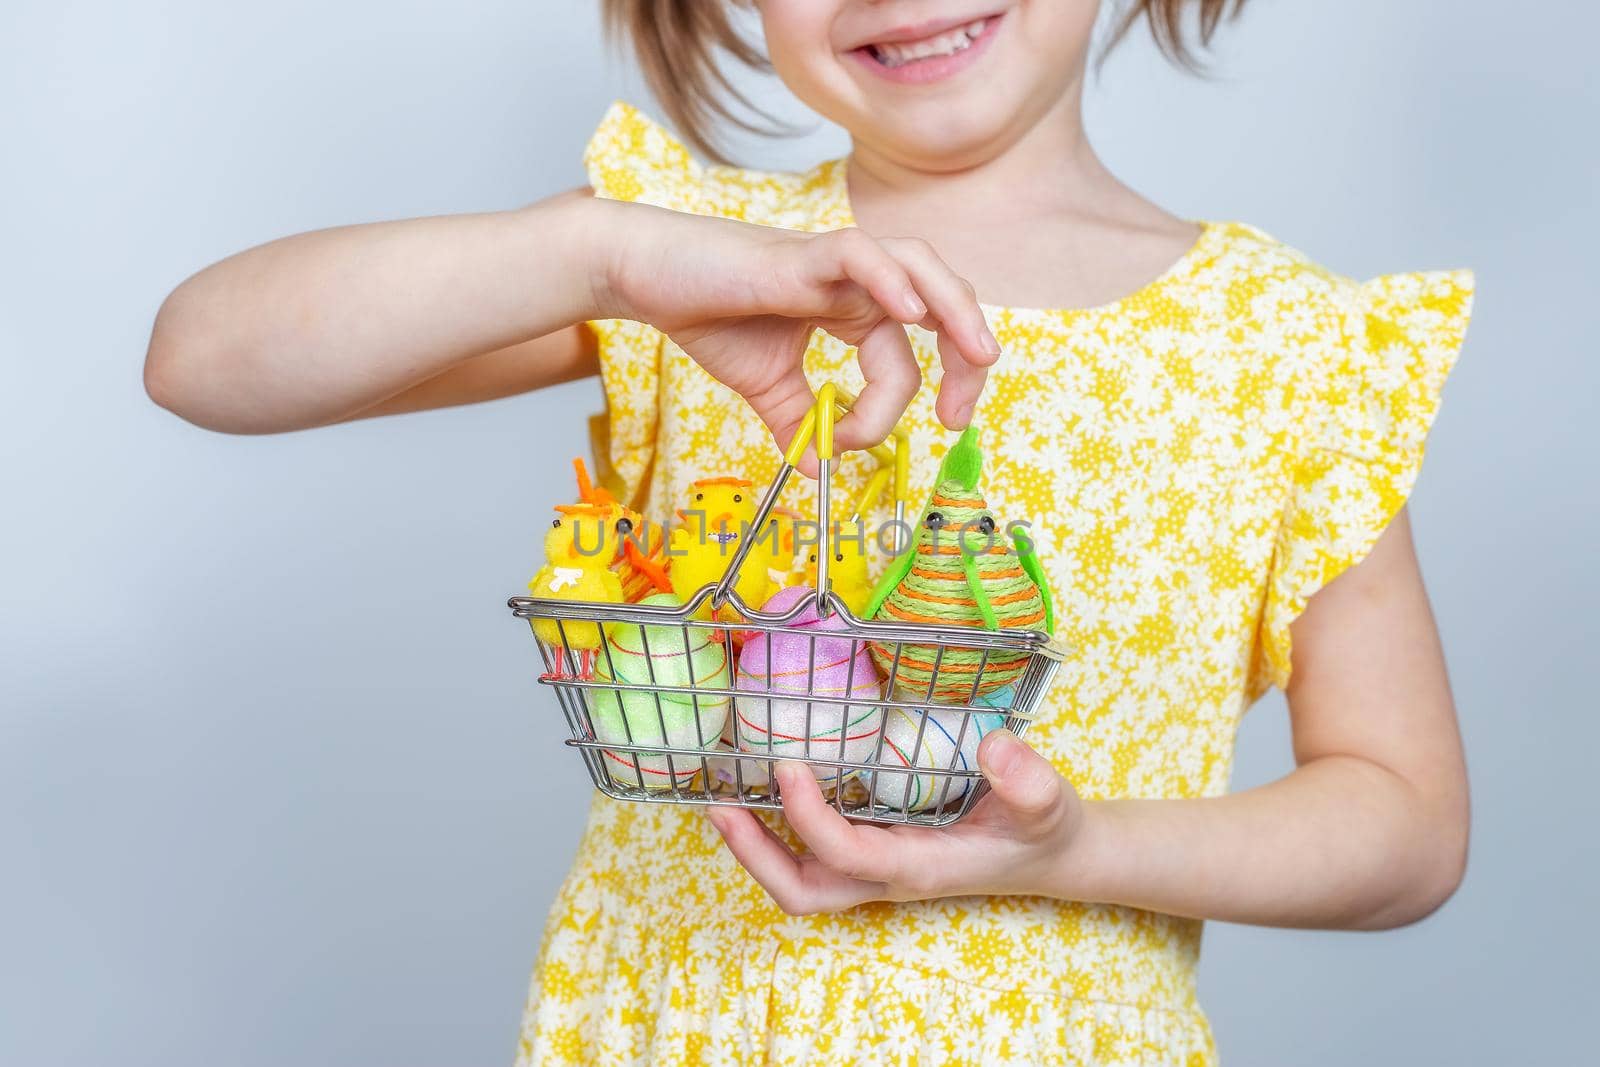 Cropped photo of girl with a shopping basket filled with Easter decorations. Easter background with place to insert text.